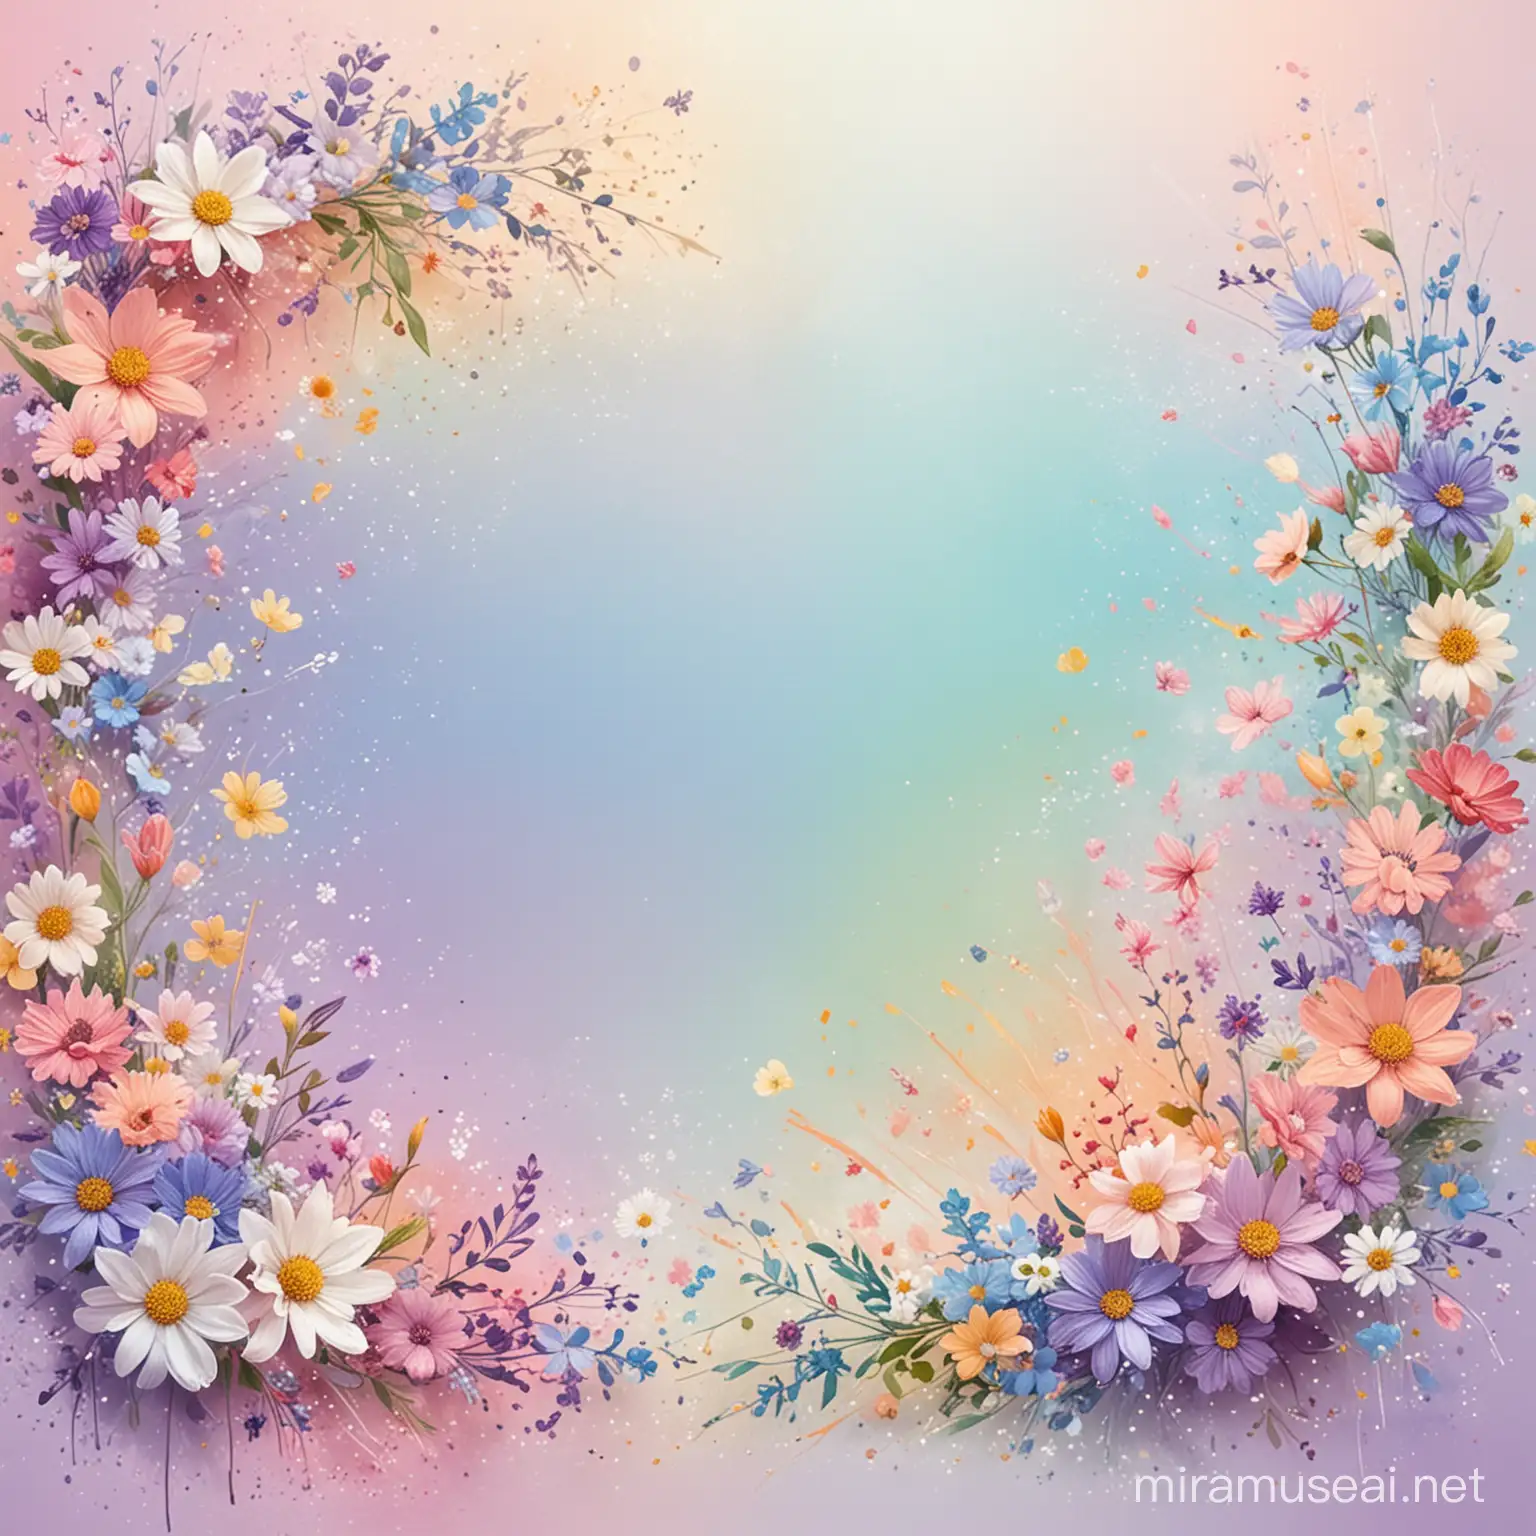 soft colorful background pastel with splashes of flowers scattered